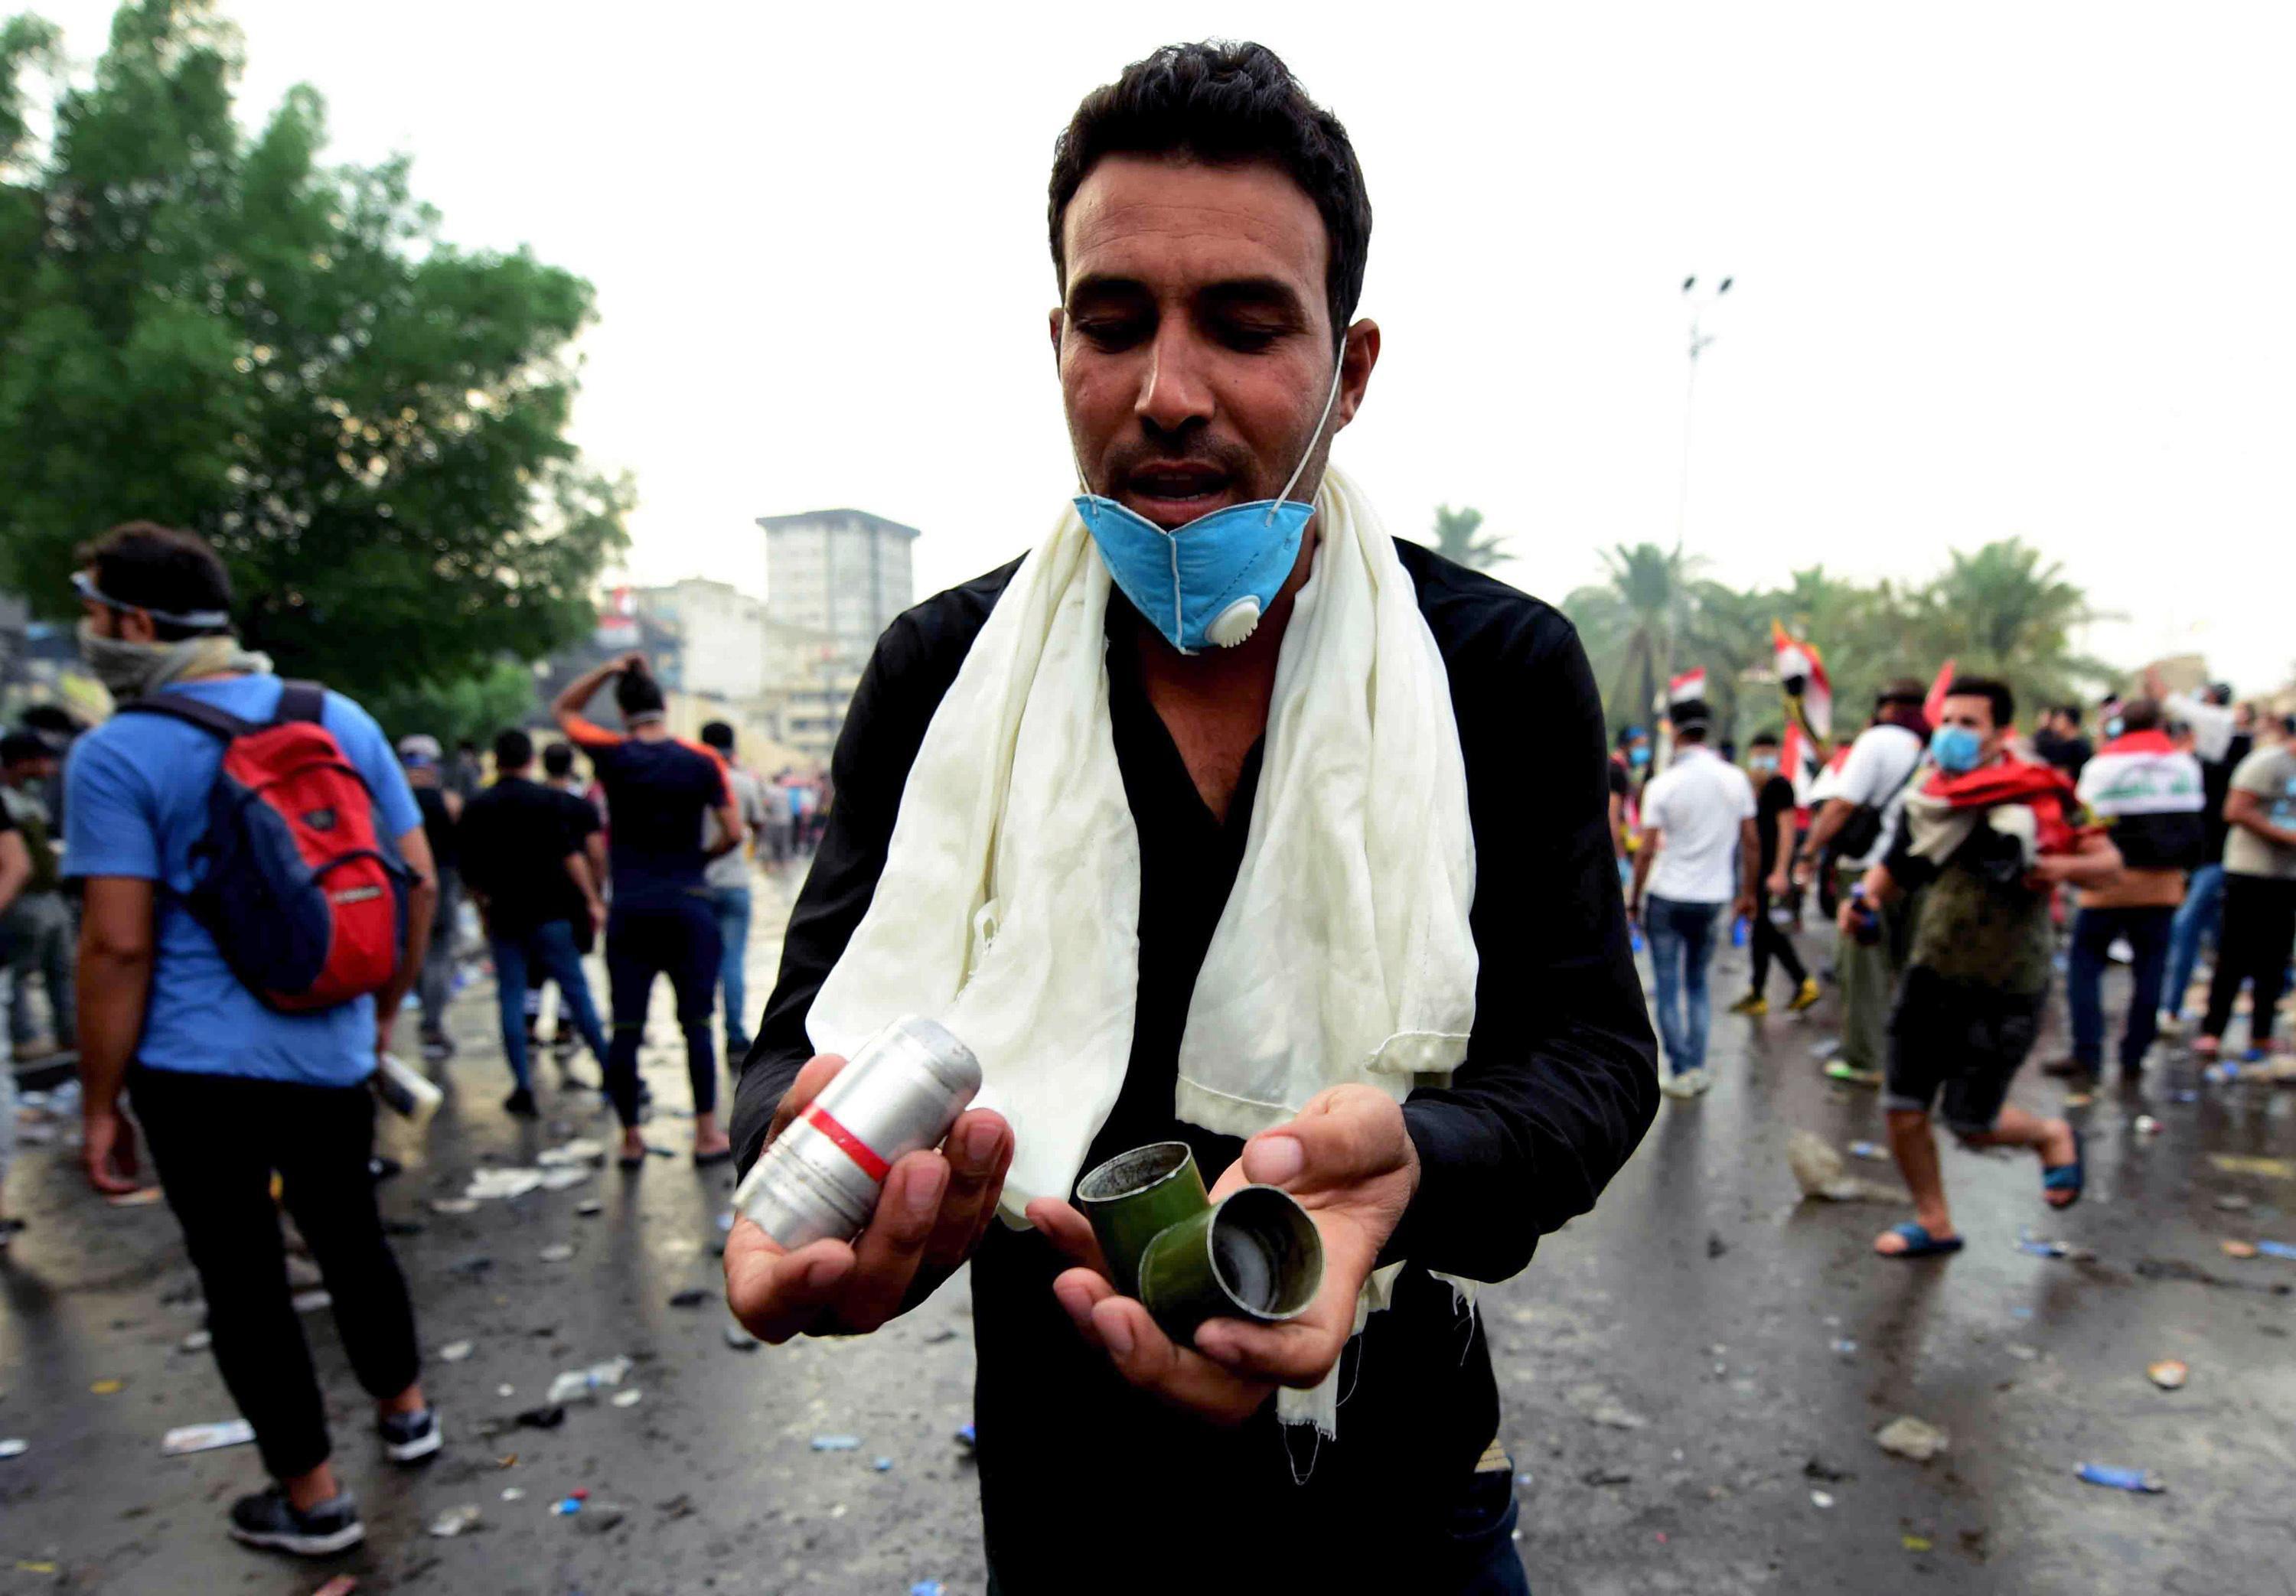 epa07954342 An Iraqi protester carries tear gas canisters which were dispensed by riot police during clashes with protesters at al-Tahrir square, central Baghdad, Iraq, 27 October 2019. According to media reports, at least 63 people died during three days of violent clashes between security forces and people protesting against the government in Baghdad and southern Iraqi cities.  EPA/MURTAJA LATEEF